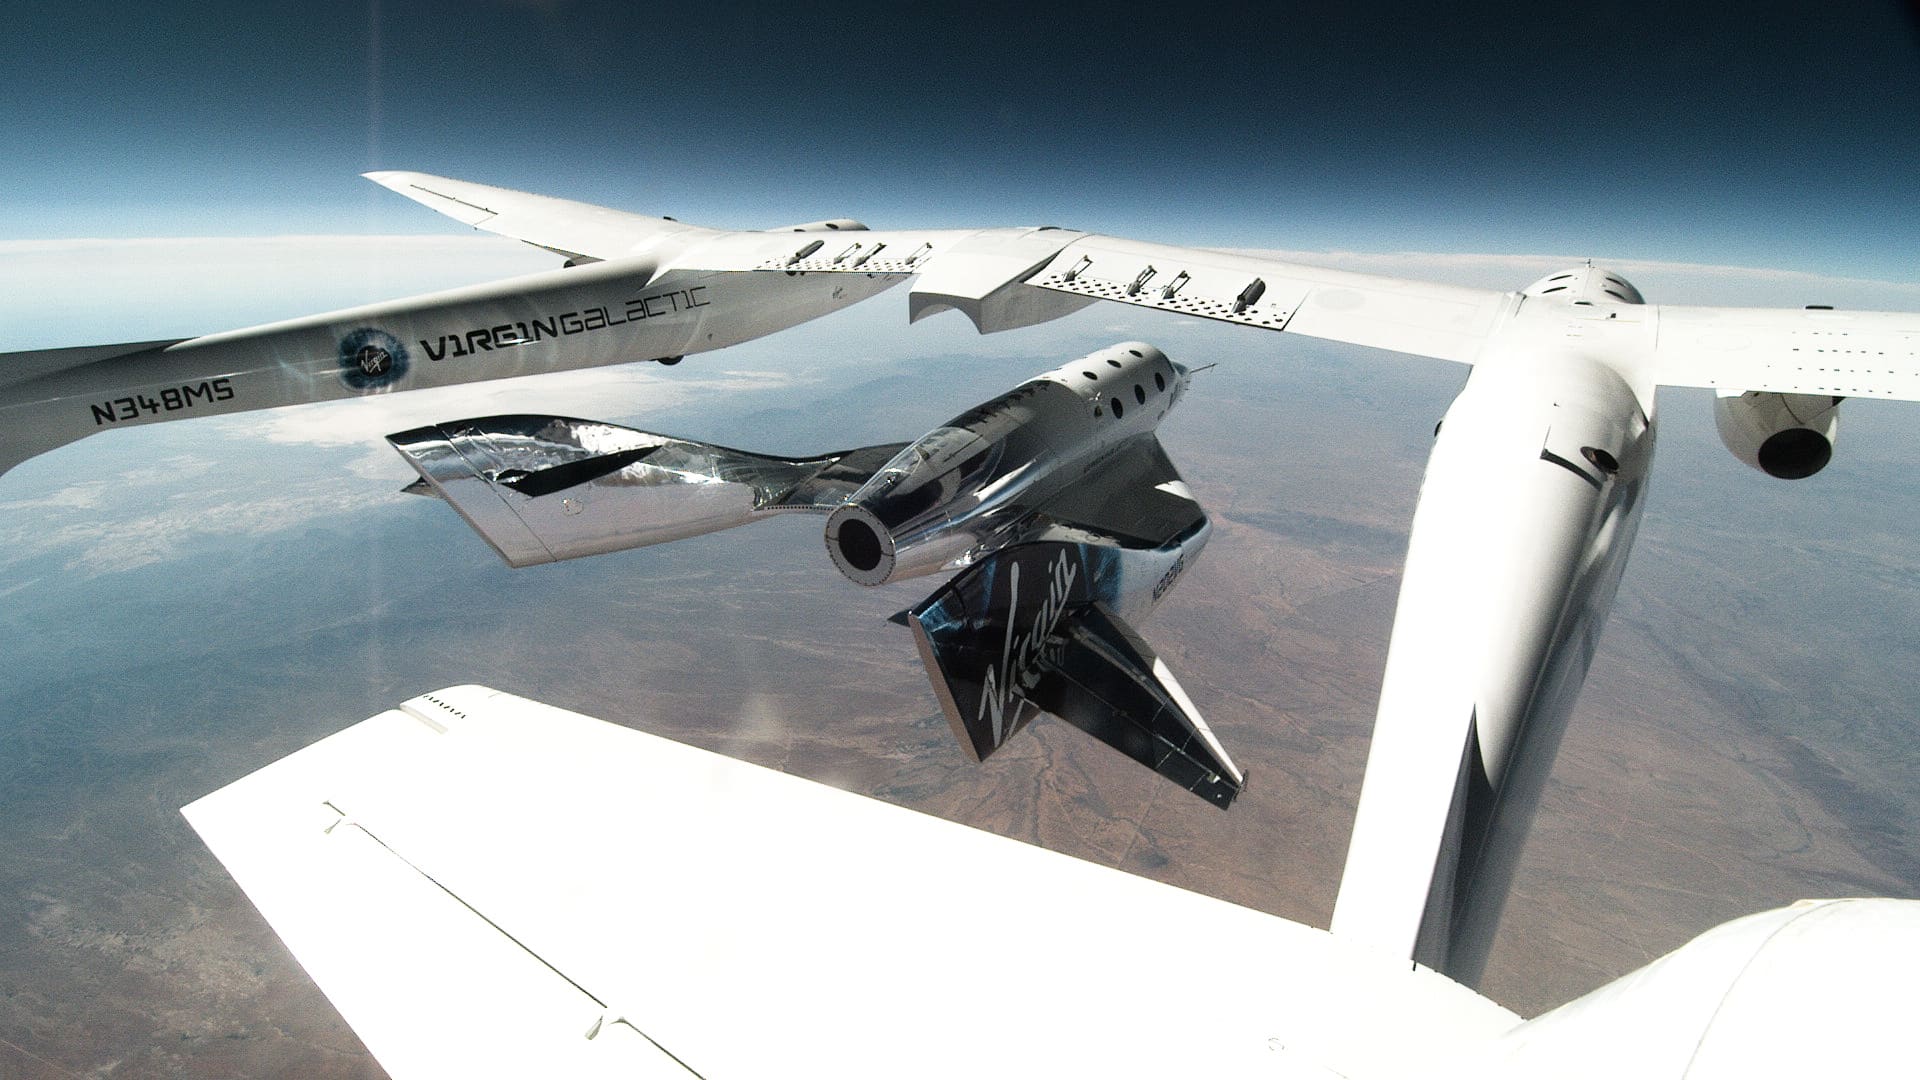 Virgin Galactic shares fall after another quarterly loss, no date set for next spaceflight test